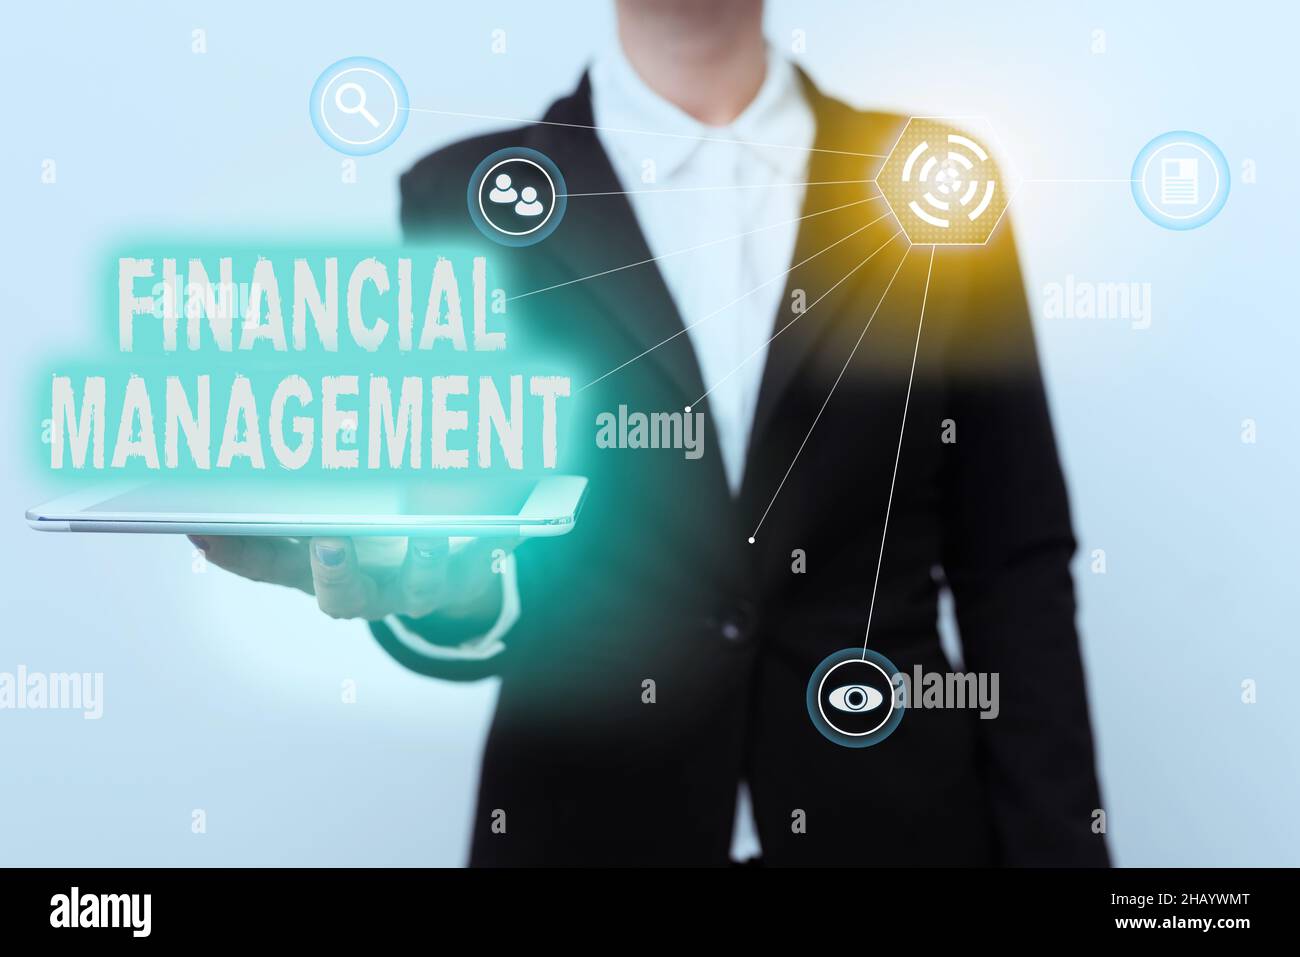 Sign displaying Financial Management. Business showcase efficient and effective way to Manage Money and Funds Woman In Uniform Displaying Mobile Stock Photo